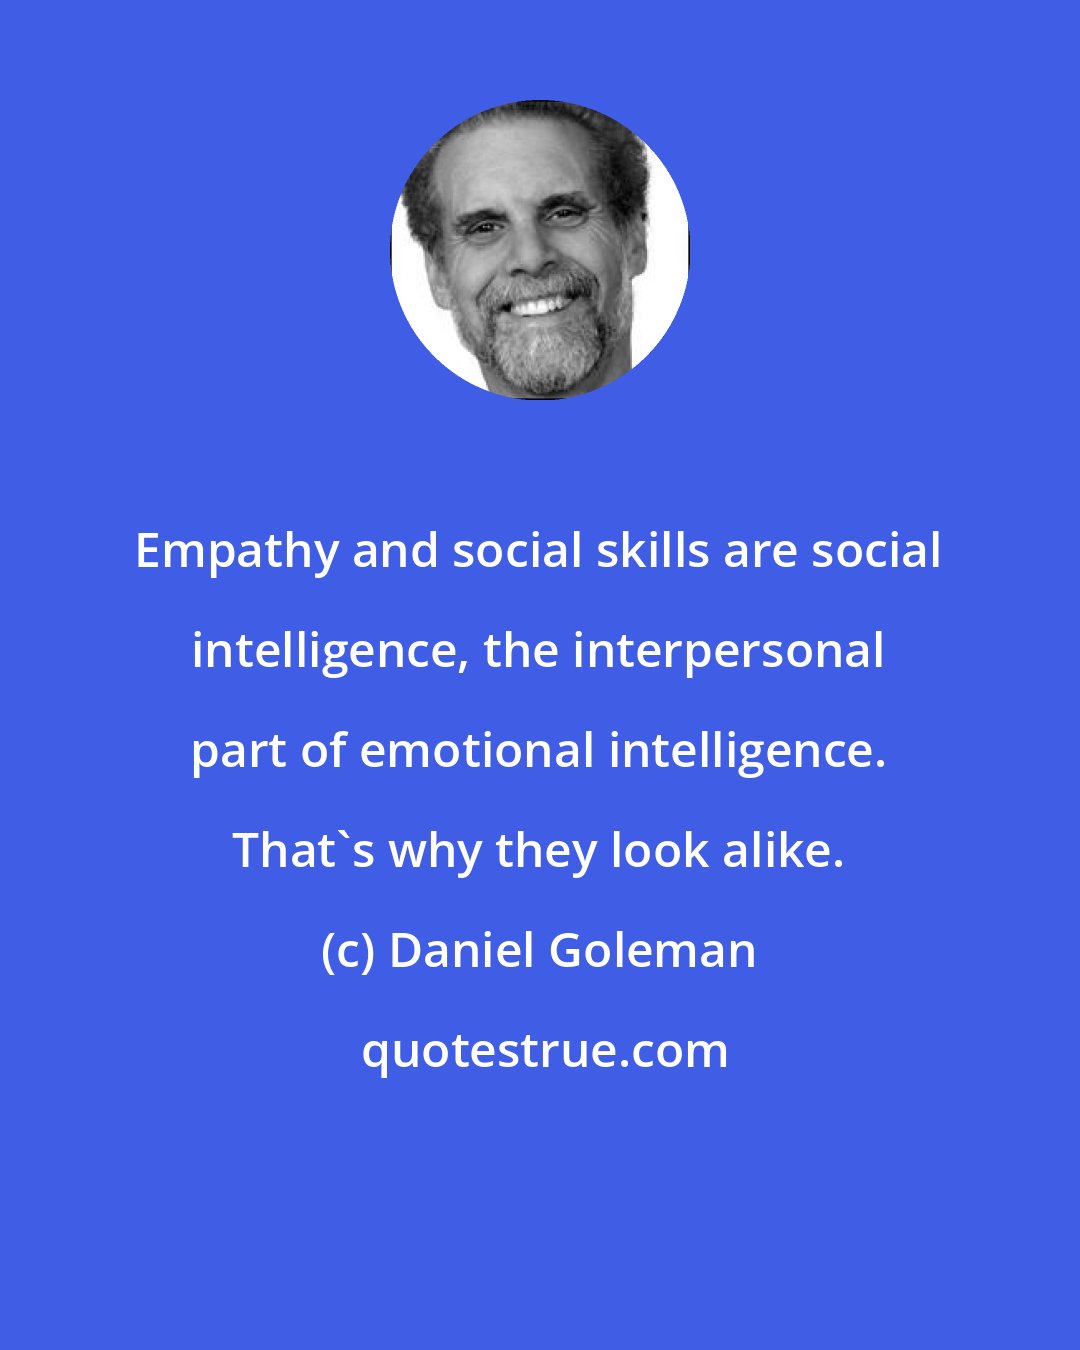 Daniel Goleman: Empathy and social skills are social intelligence, the interpersonal part of emotional intelligence. That's why they look alike.